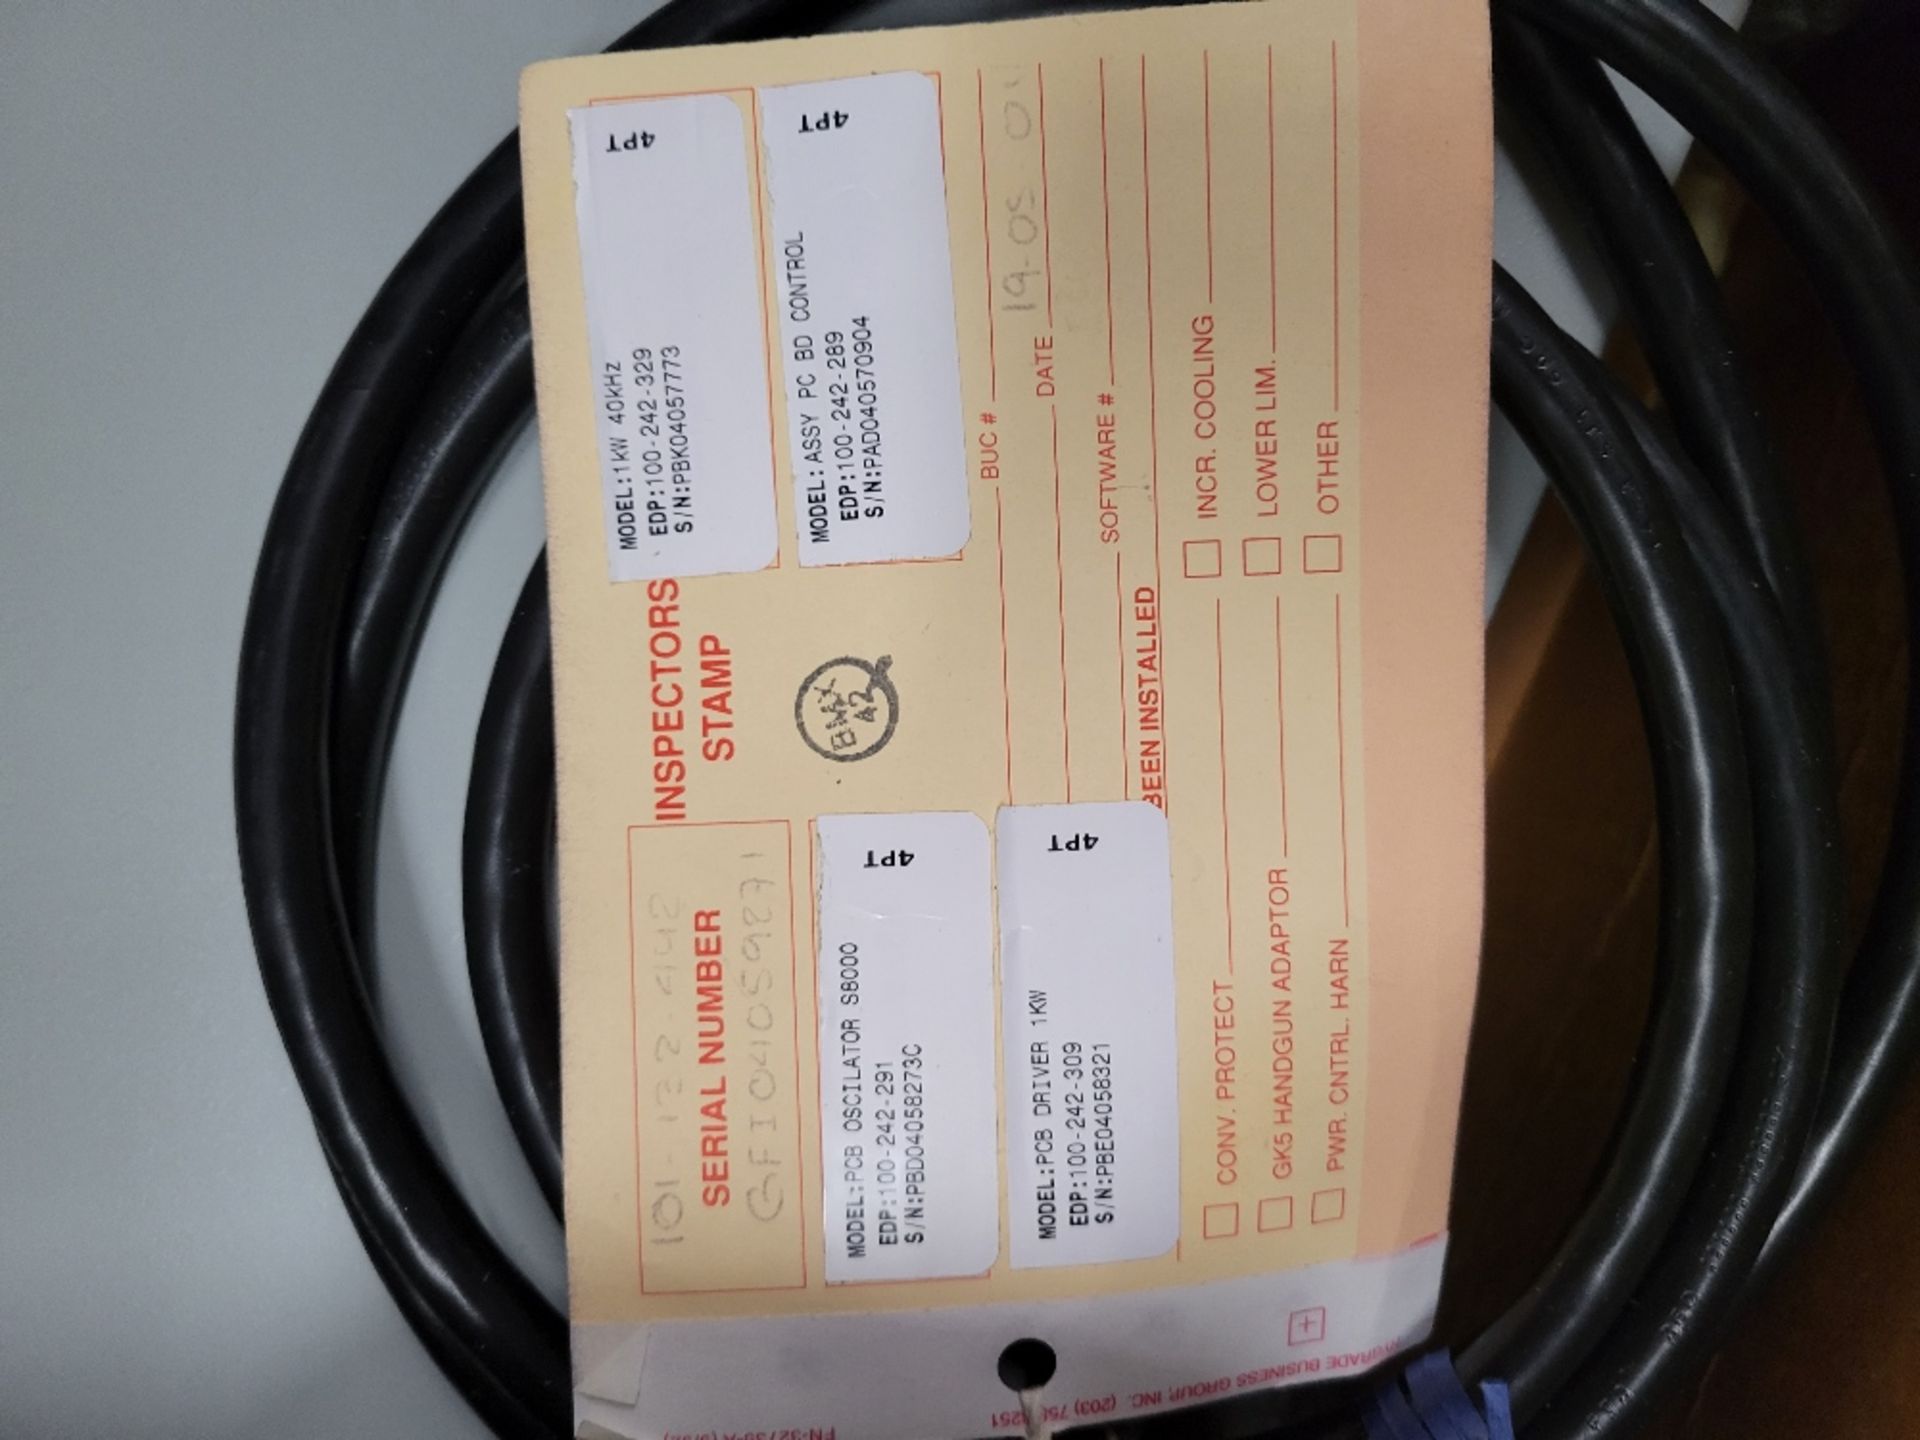 Branson NSB S8540-18 Other Power Supplies Series 8500 3.5A 230V 40kHz - Image 4 of 5